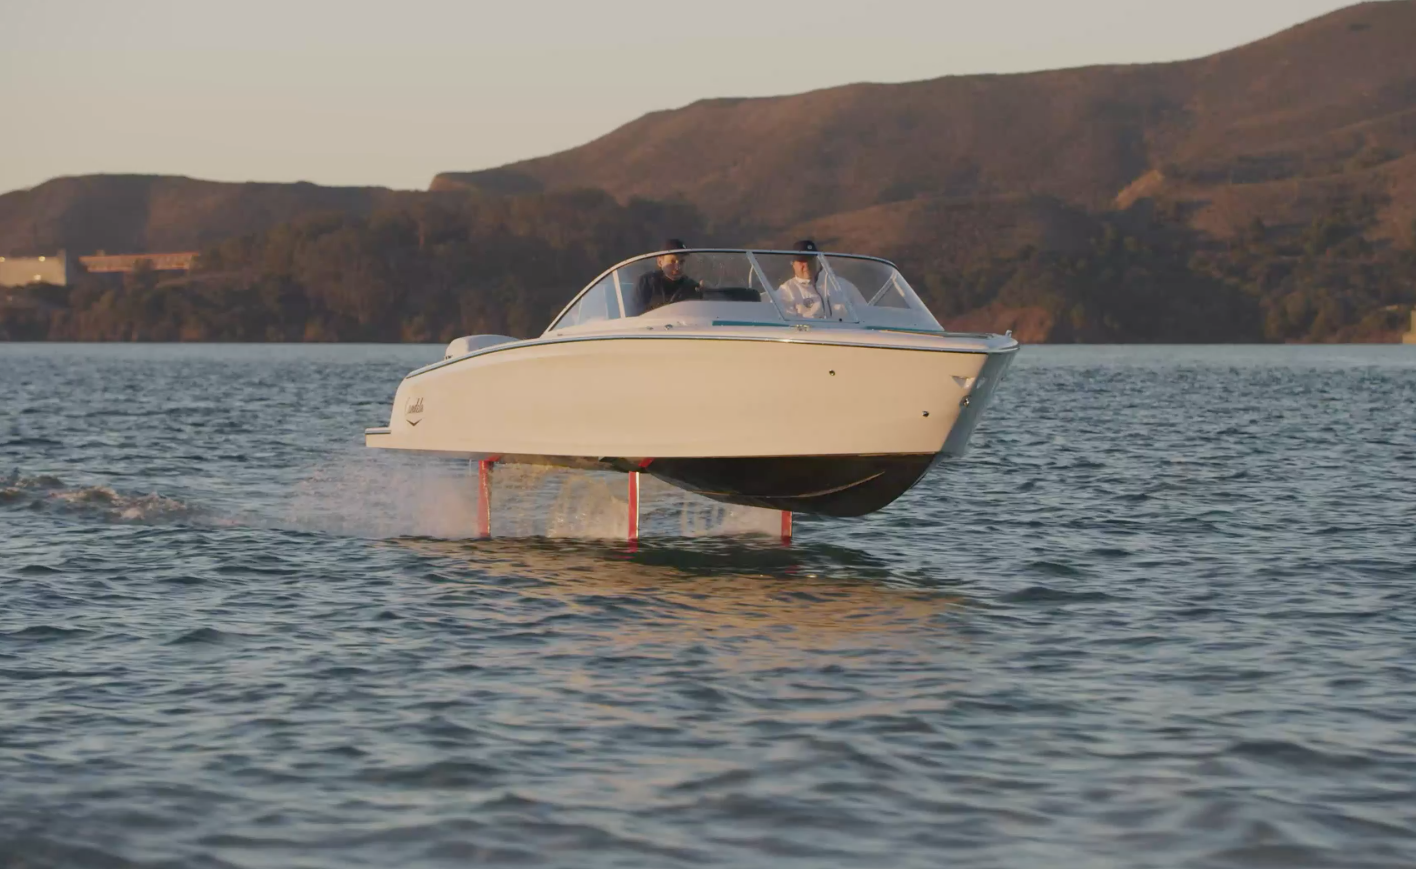 Reduced wake, almost no noise, and a smooth ride – are electric hydrofoil boats the future?